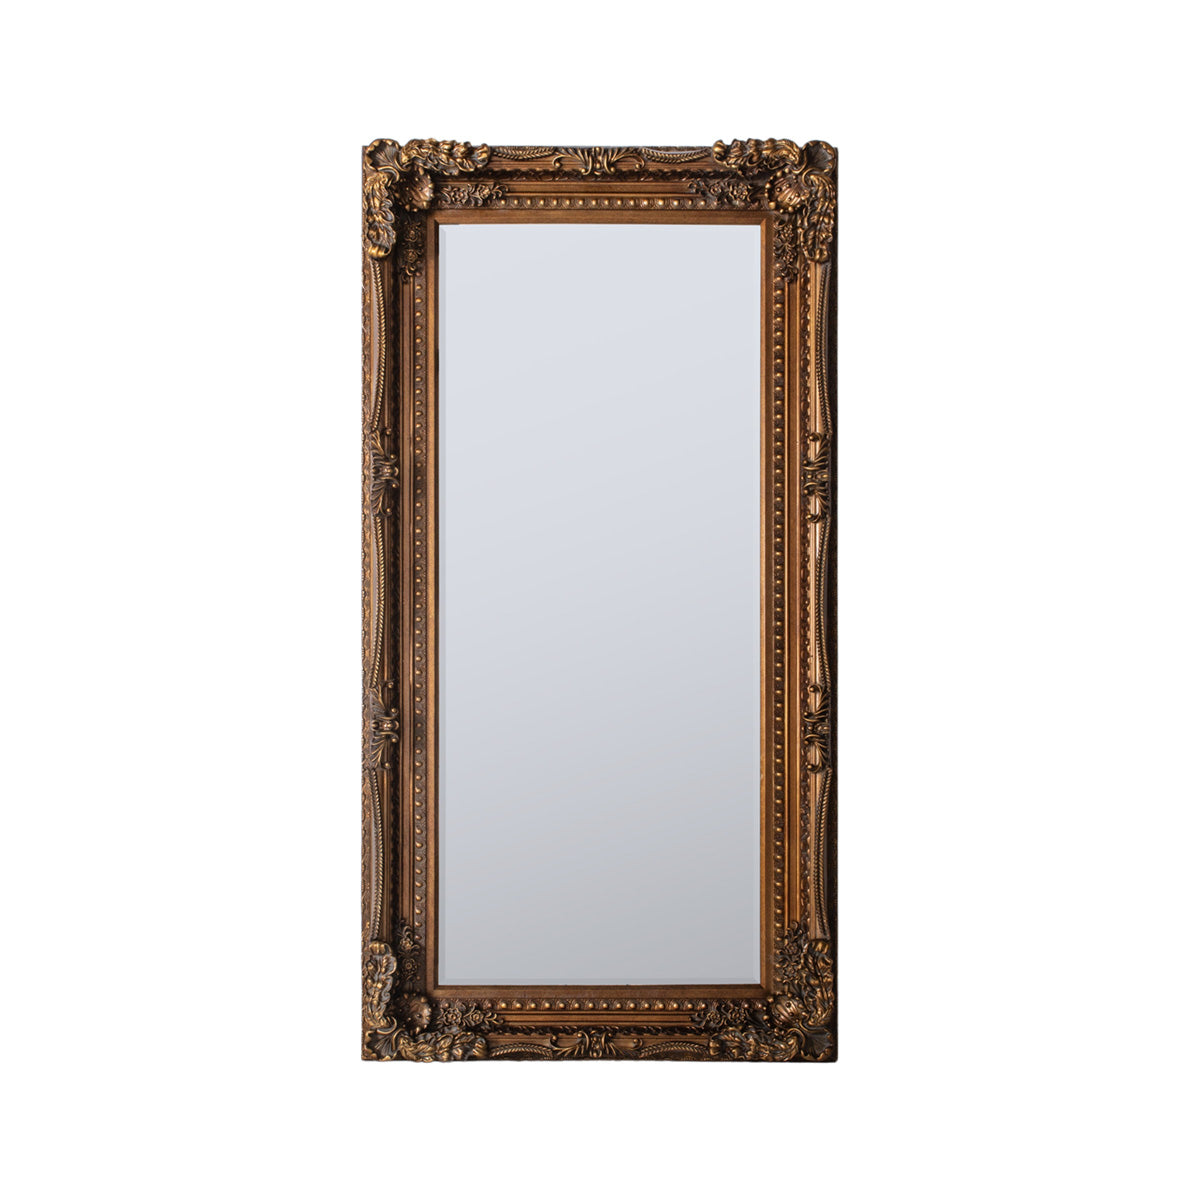 Large Rectangular Gold Baroque Leaner Mirror 175.5x89.5x9.5cm – Click Style